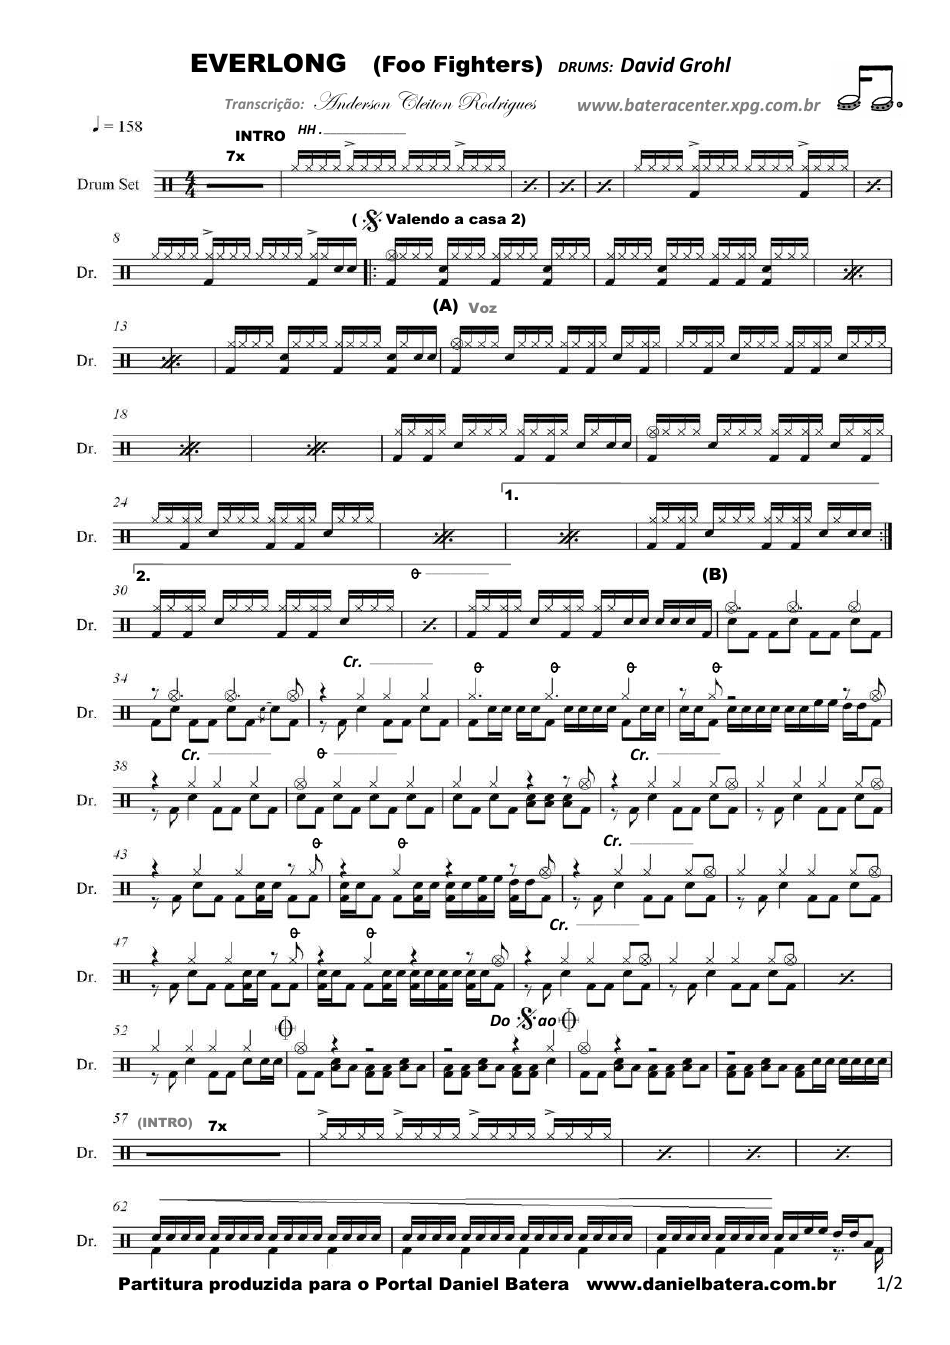 Foo Fighters - Everlong Drums Sheet Music preview image